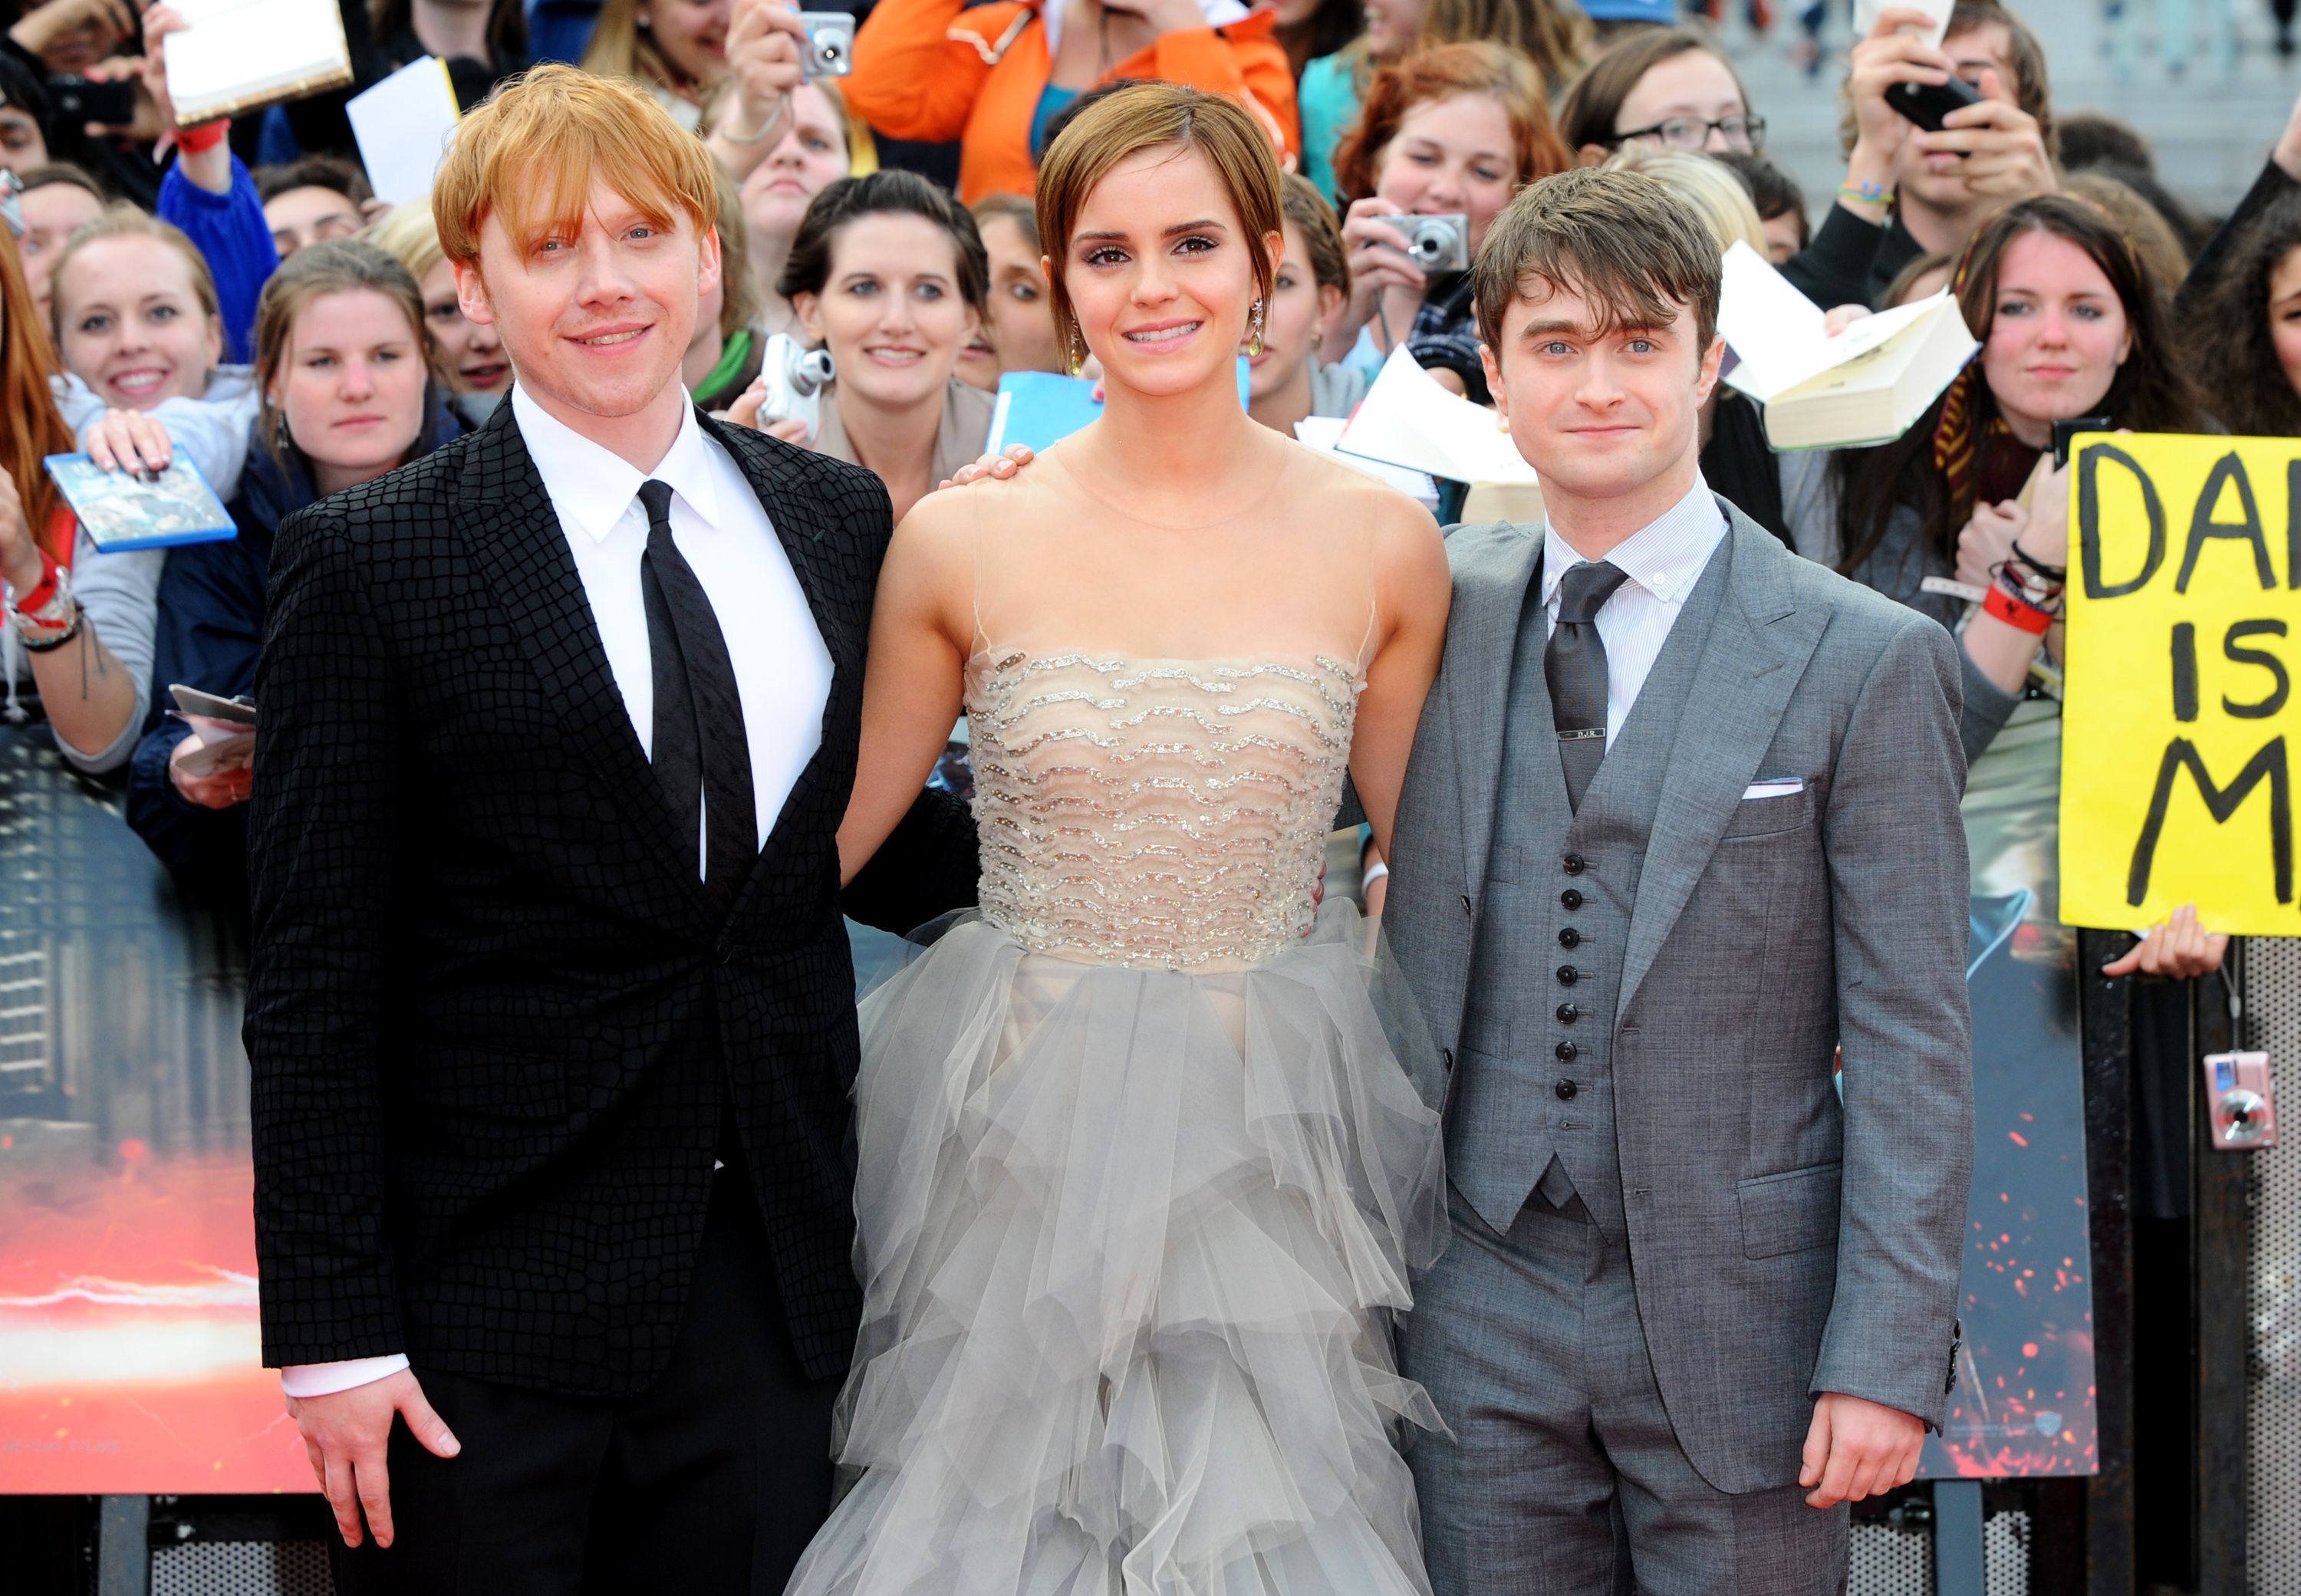 Original 'Harry Potter' Star Reveals Who They Would Play In TV Series